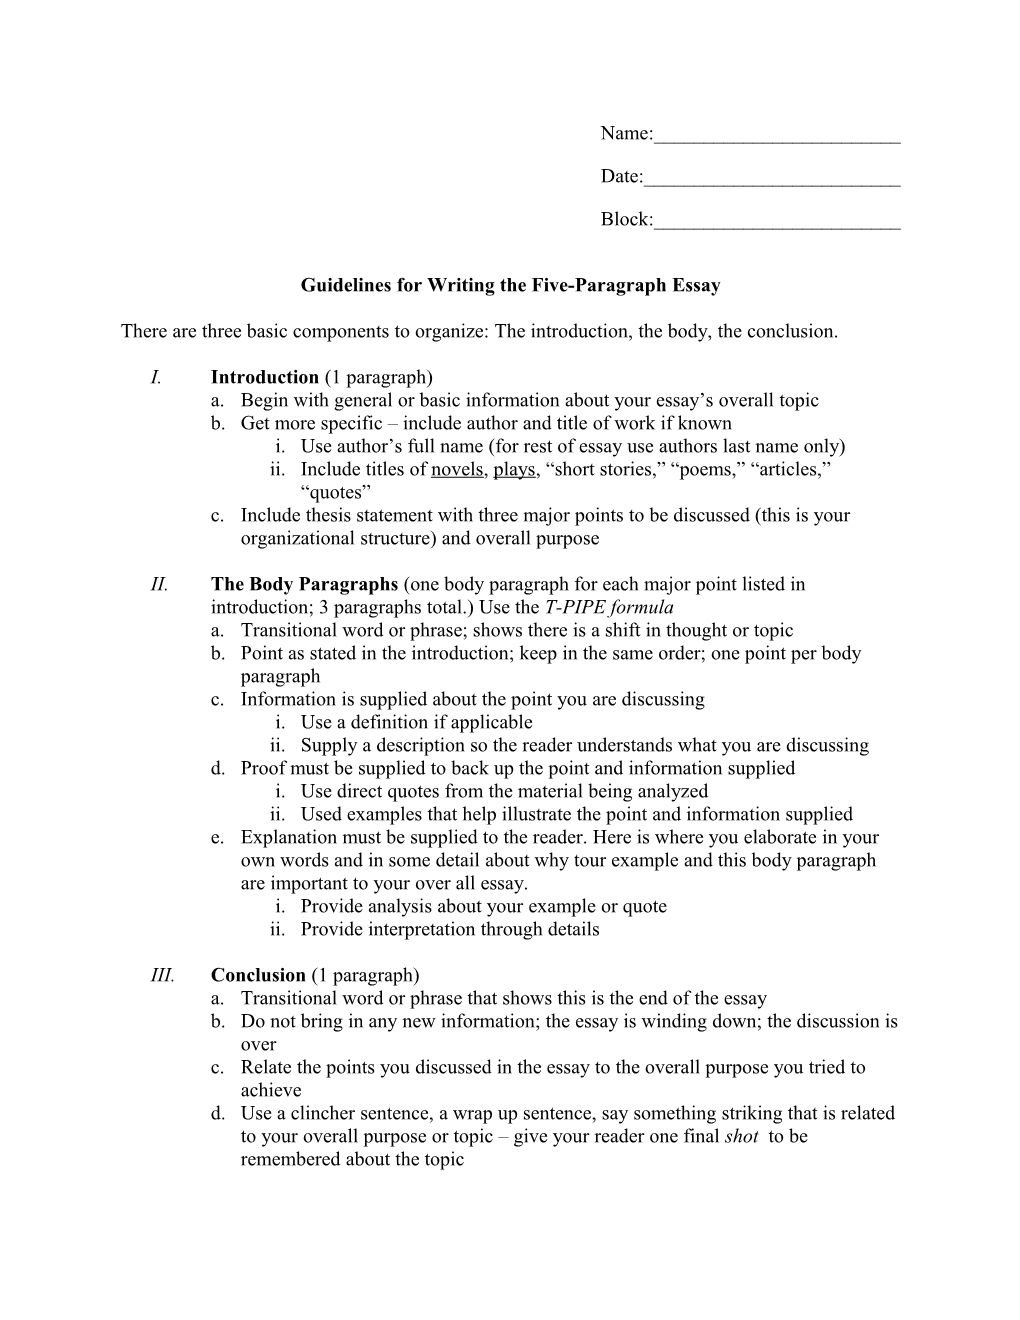 Guidelines for Writing the Five-Paragraph Essay